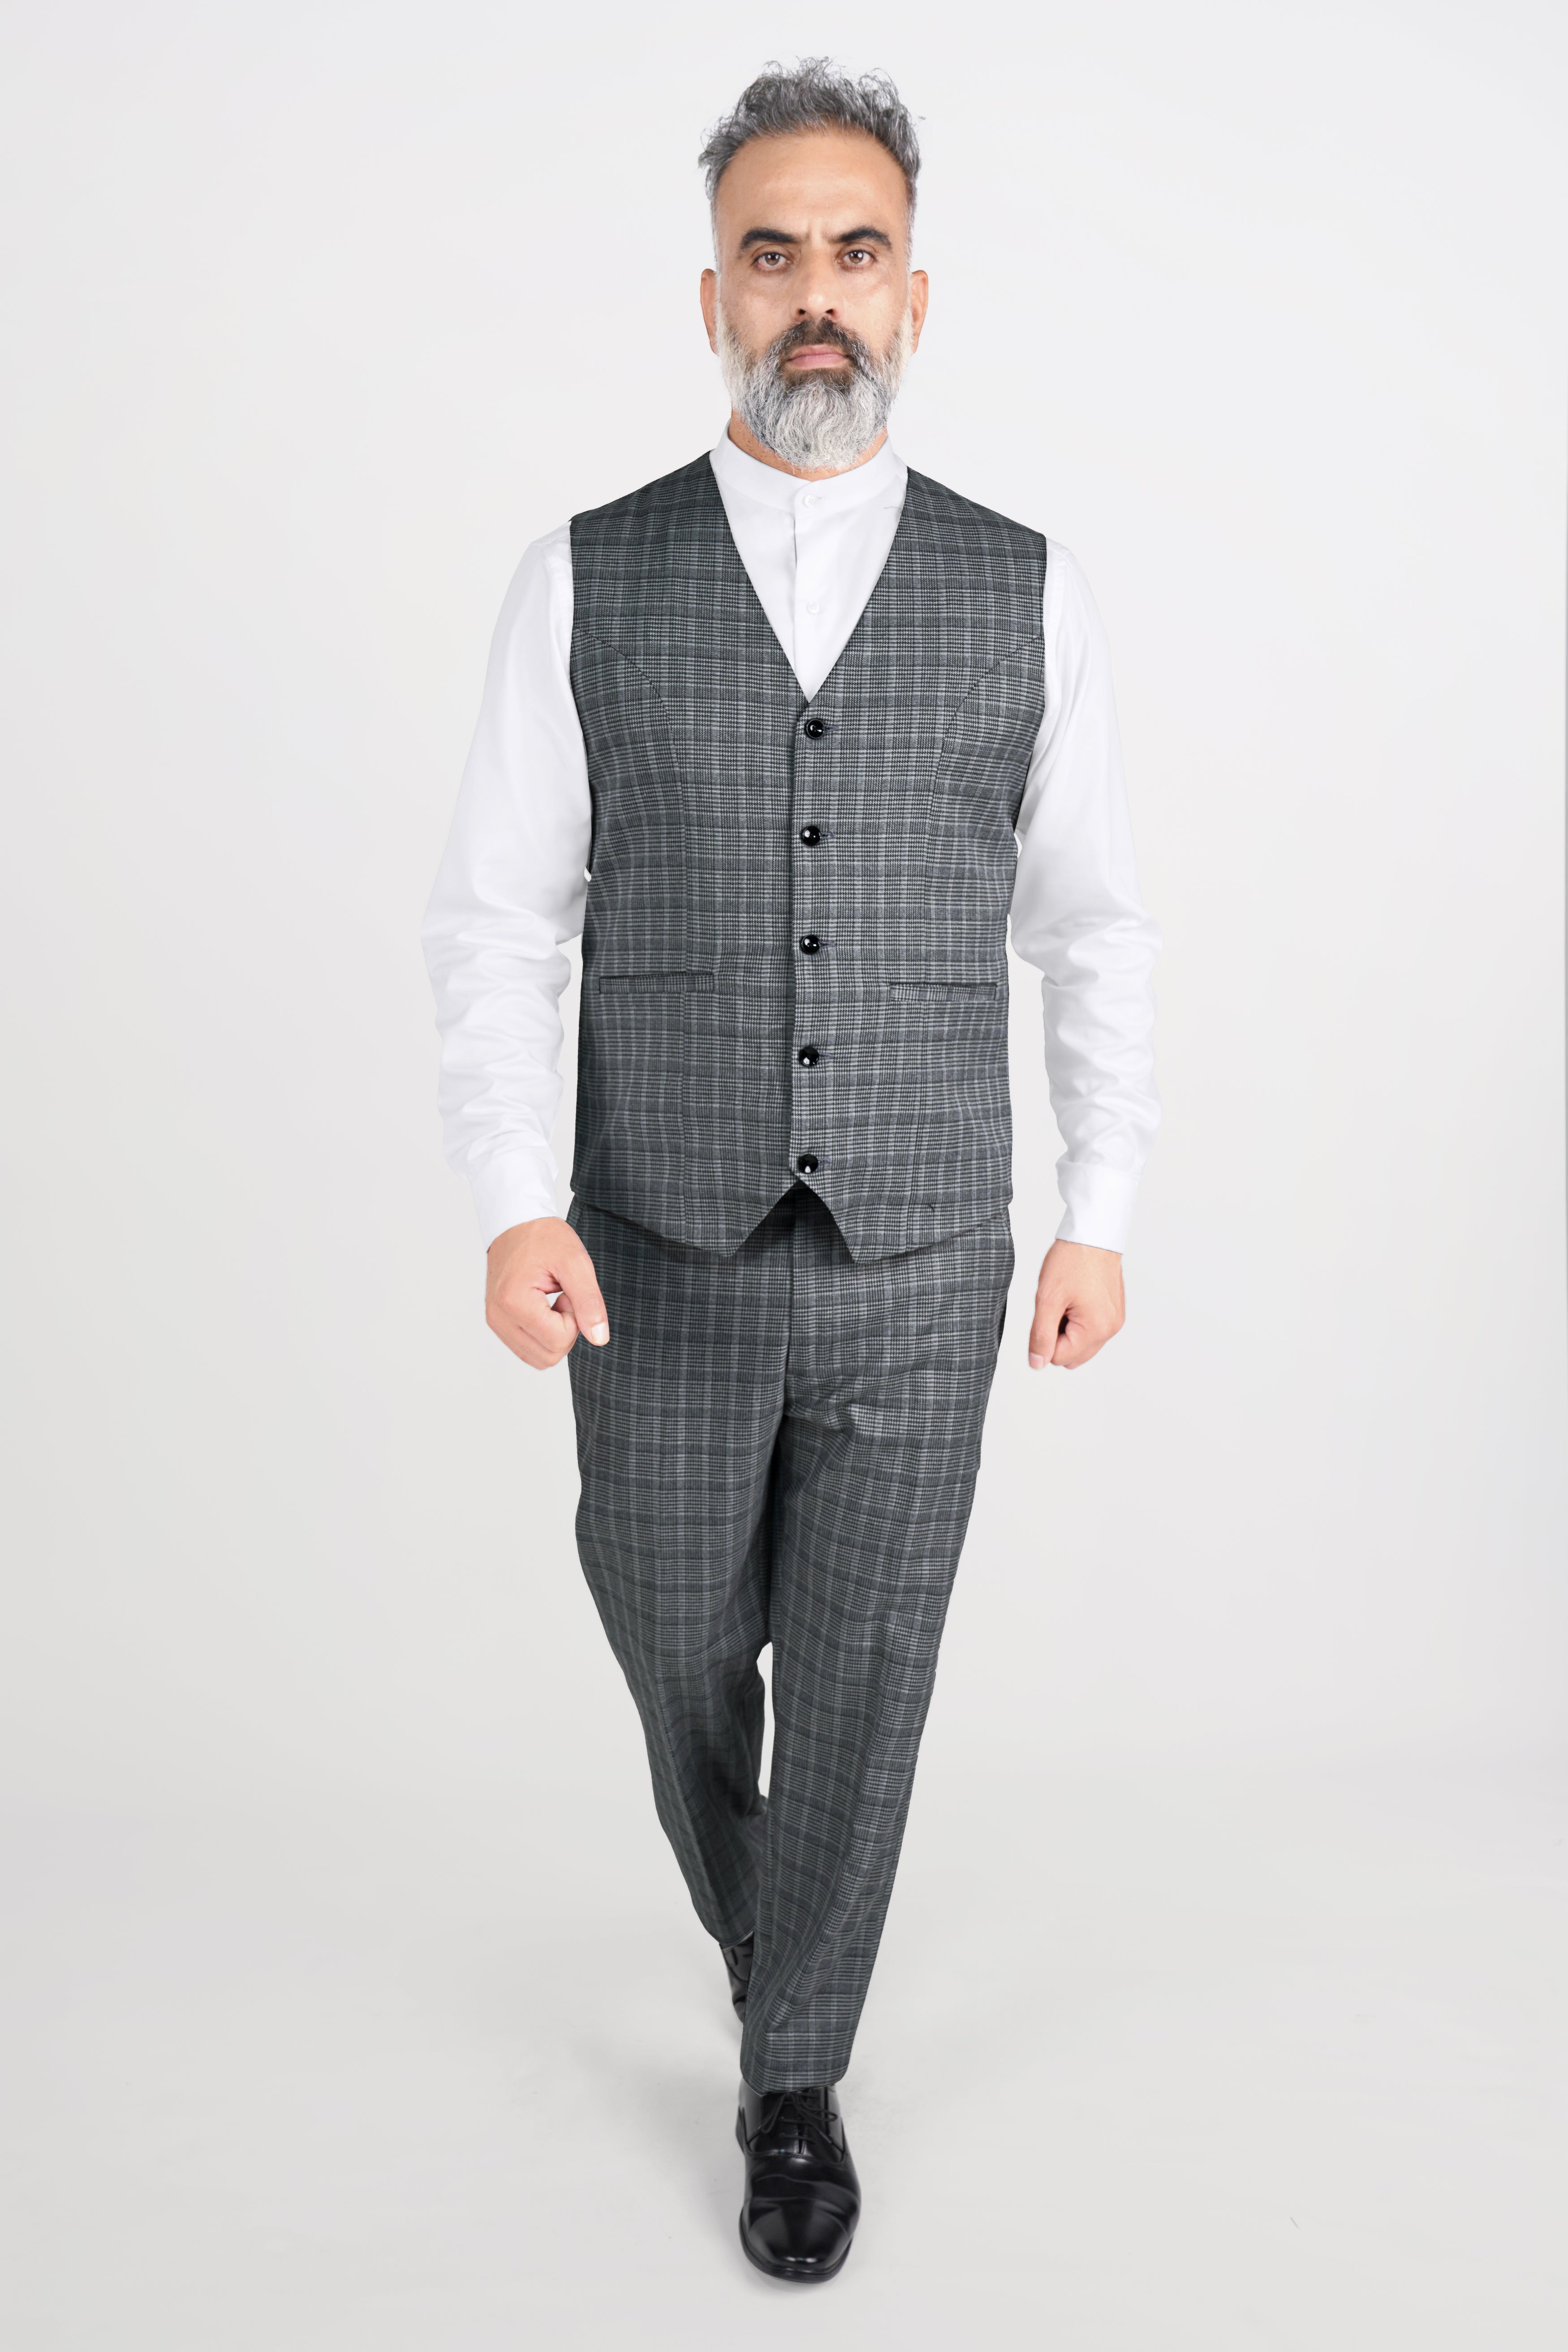 Oslo Gray Checkered Wool Rich Stretchable Traveler Waistcoat V2801-36, V2801-38, V2801-40, V2801-42, V2801-44, V2801-46, V2801-48, V2801-50, V2801-52, V2801-54, V2801-56, V2801-58, V2801-60